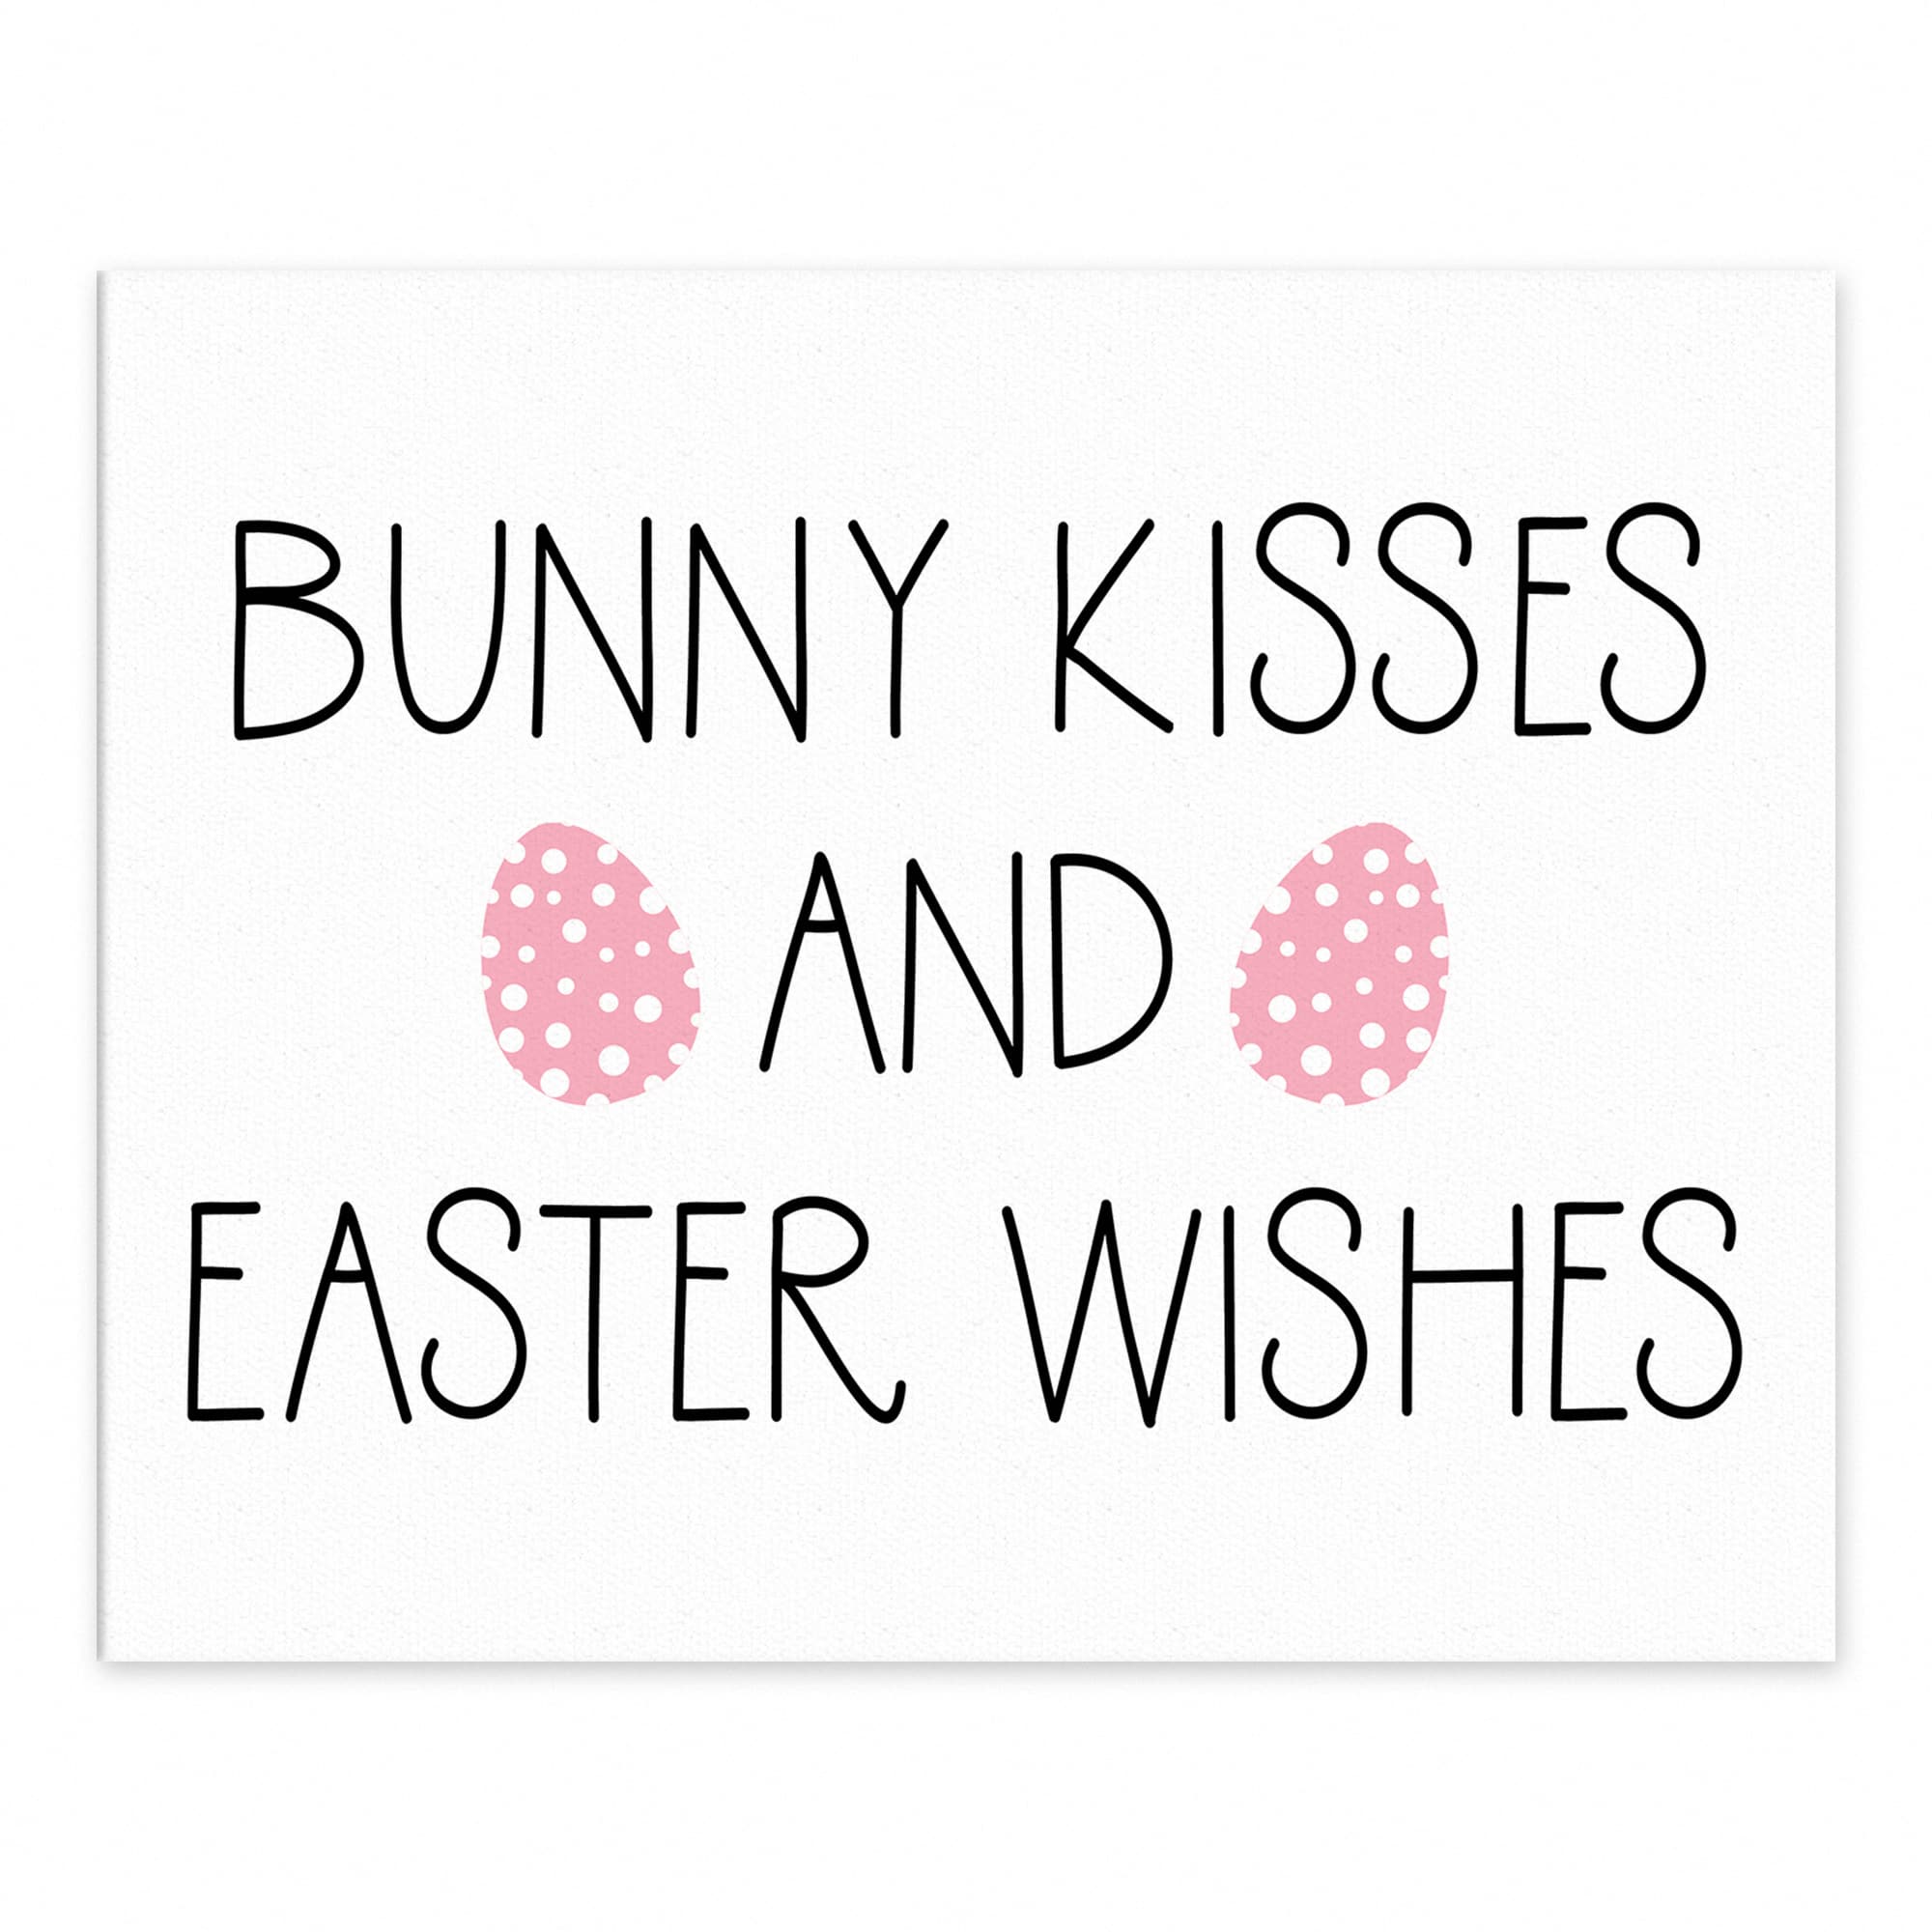 Purchase the Bunny Kisses and Easter Wishes Tabletop Canvas at Michaels